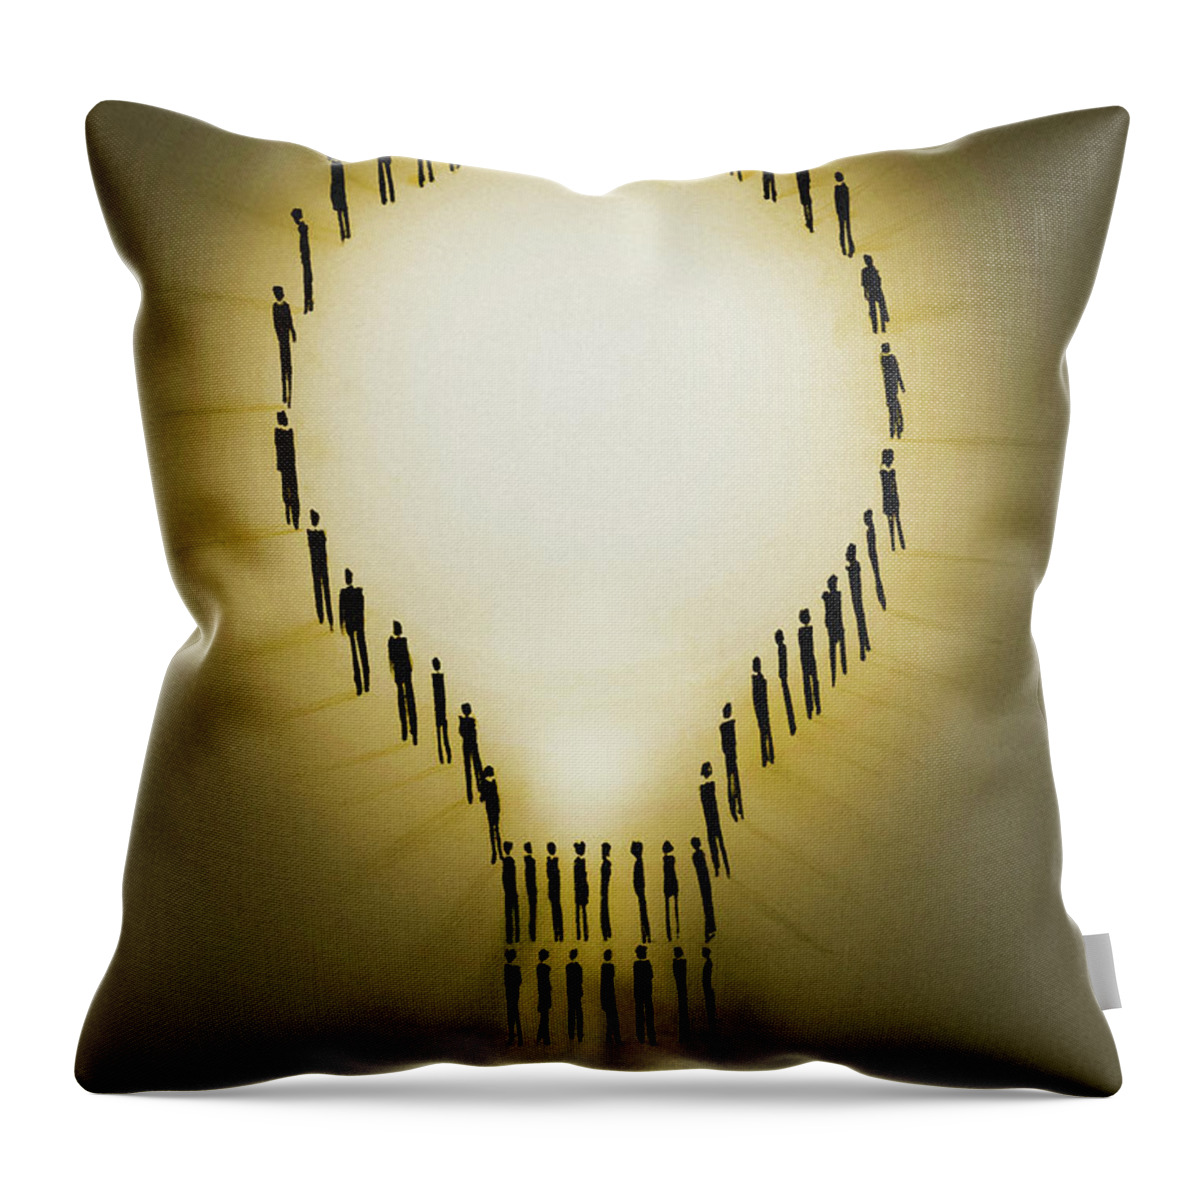 Adult Throw Pillow featuring the photograph People Outlining Illuminated Light Bulb by Ikon Ikon Images